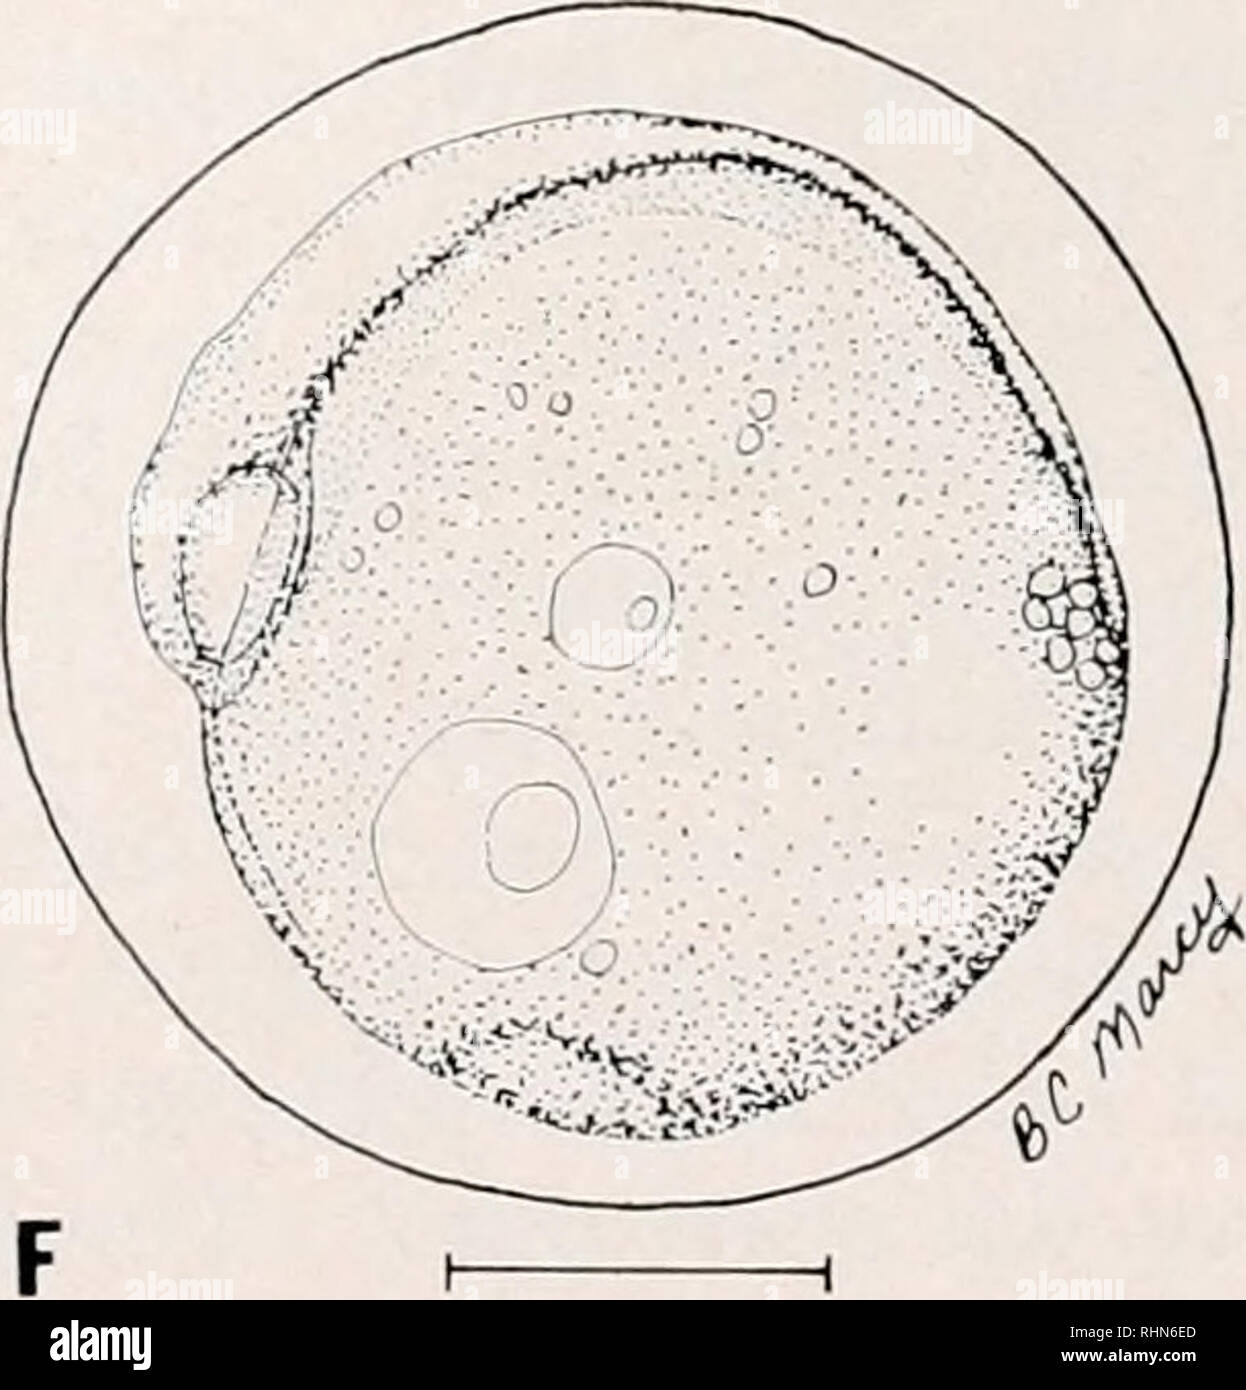 . The Biological bulletin. Biology; Zoology; Biology; Marine Biology. FIGURE 2. Development of the eggs of the grubby, Myoxocephalus acnacus, artificially propagated in the laboratory: A-B) 64-cell to multicellular stage, 1.60 and 1.57 mm (33-98 hr) ; C) blastula stage, 1.53 mm (196 hr—8 days) ; D) gastrula stage, 1.53 mm (196 hr—8 days) ; E-F) early embroynic stages, 1.60 mm (189-246 hr—7.8 to 10.3 days), scale = 0.5 mm. Measurements refer to mean egg capsule diameters.. Please note that these images are extracted from scanned page images that may have been digitally enhanced for readability  Stock Photo